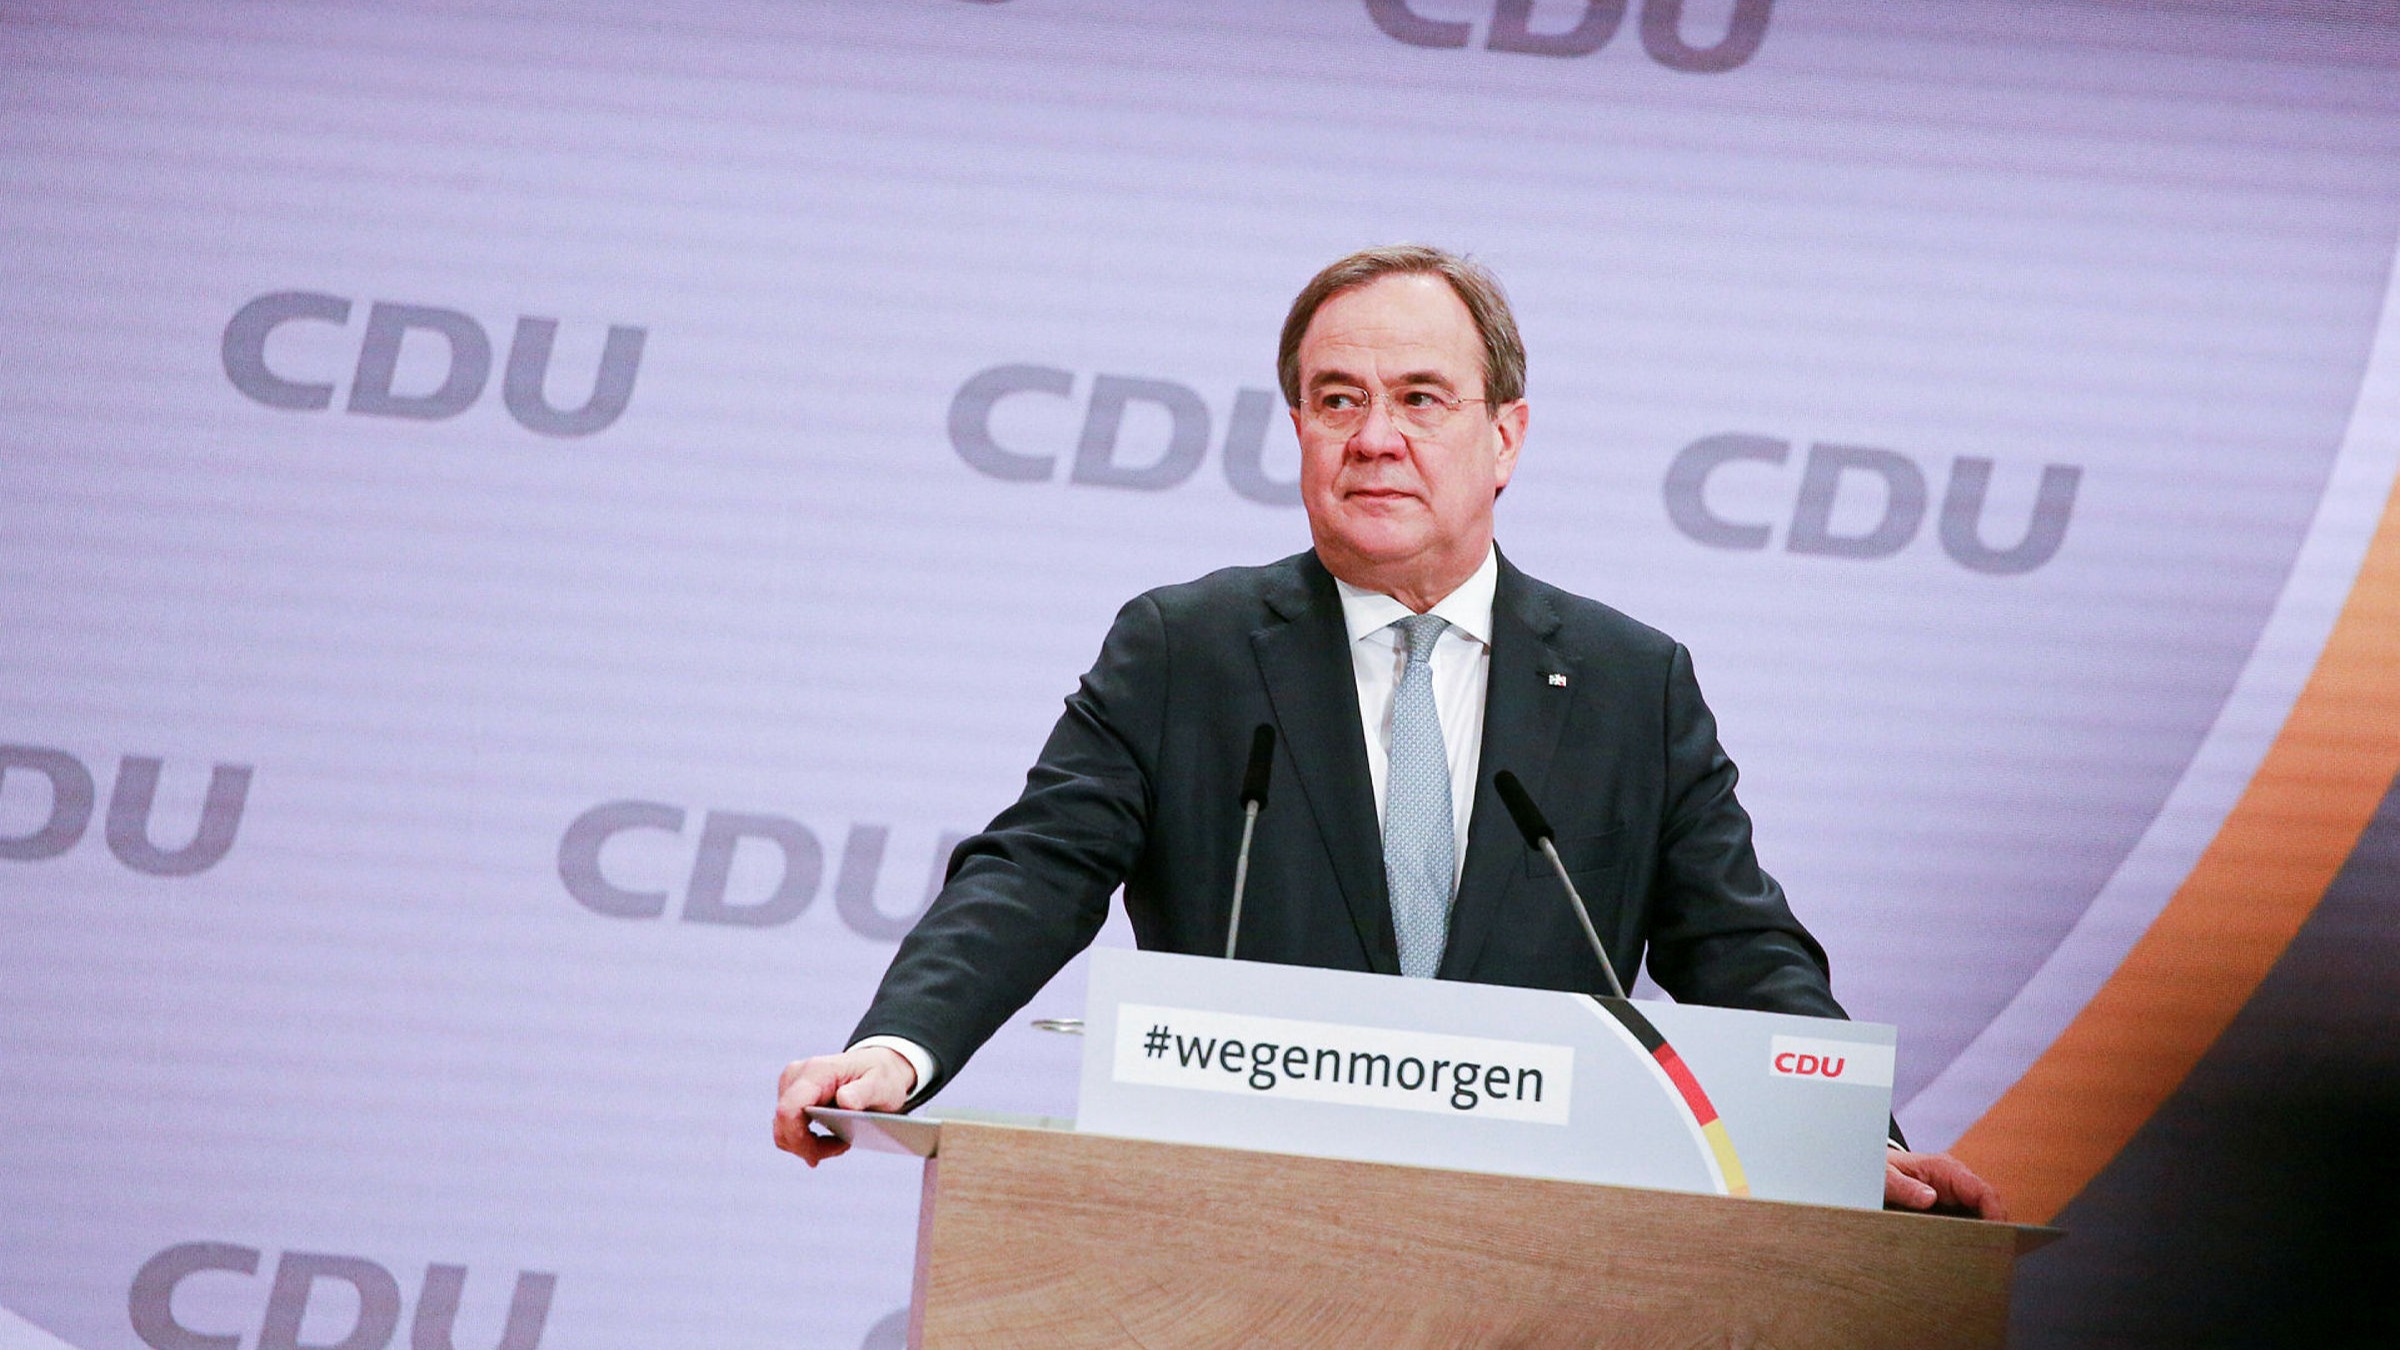 centrist legacy hangs over the new CDU leader | Financial Times